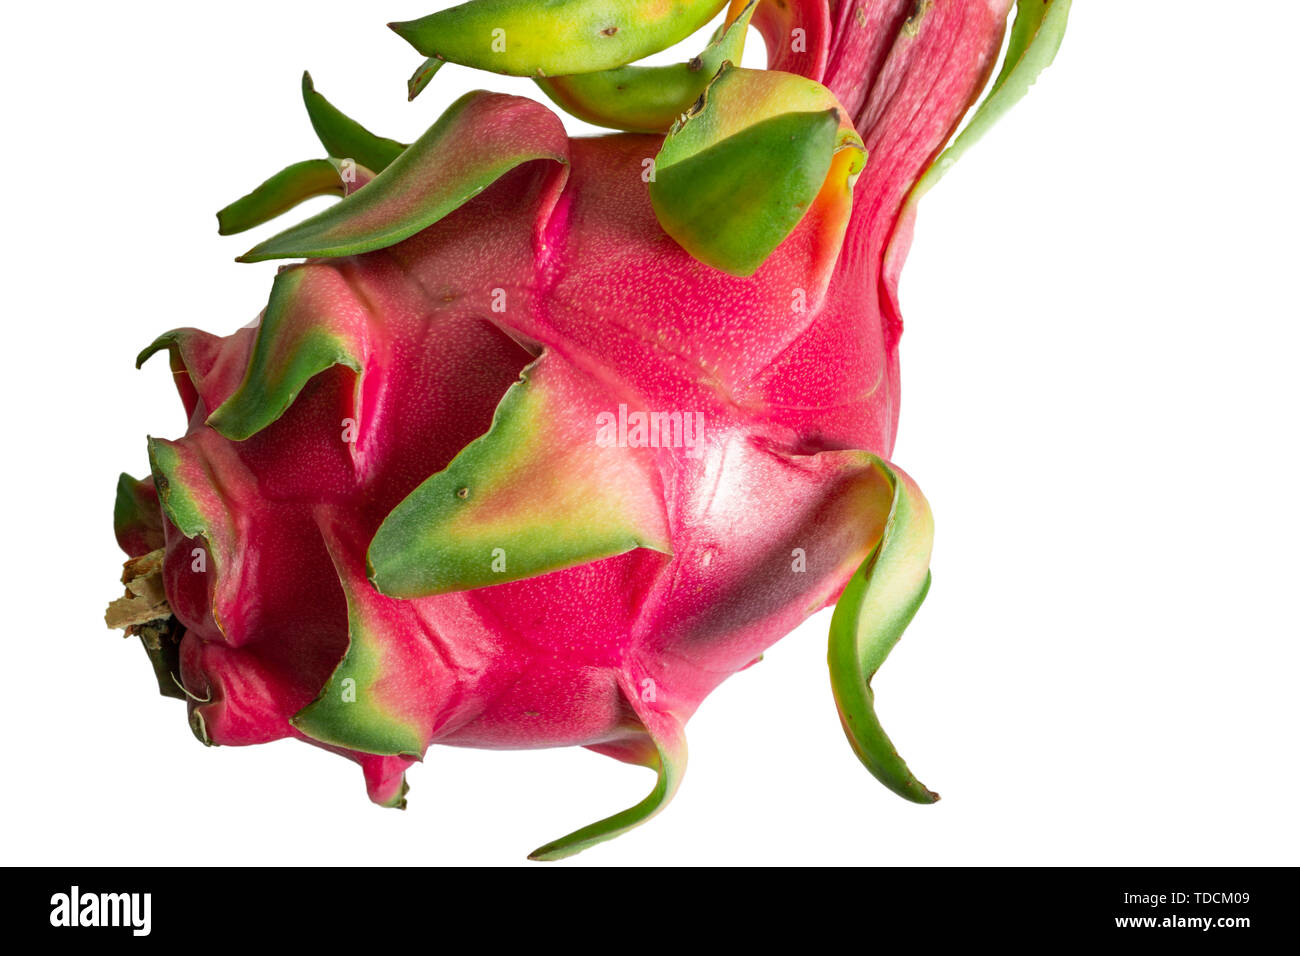 Local close-up of dragon fruit on white background Stock Photo